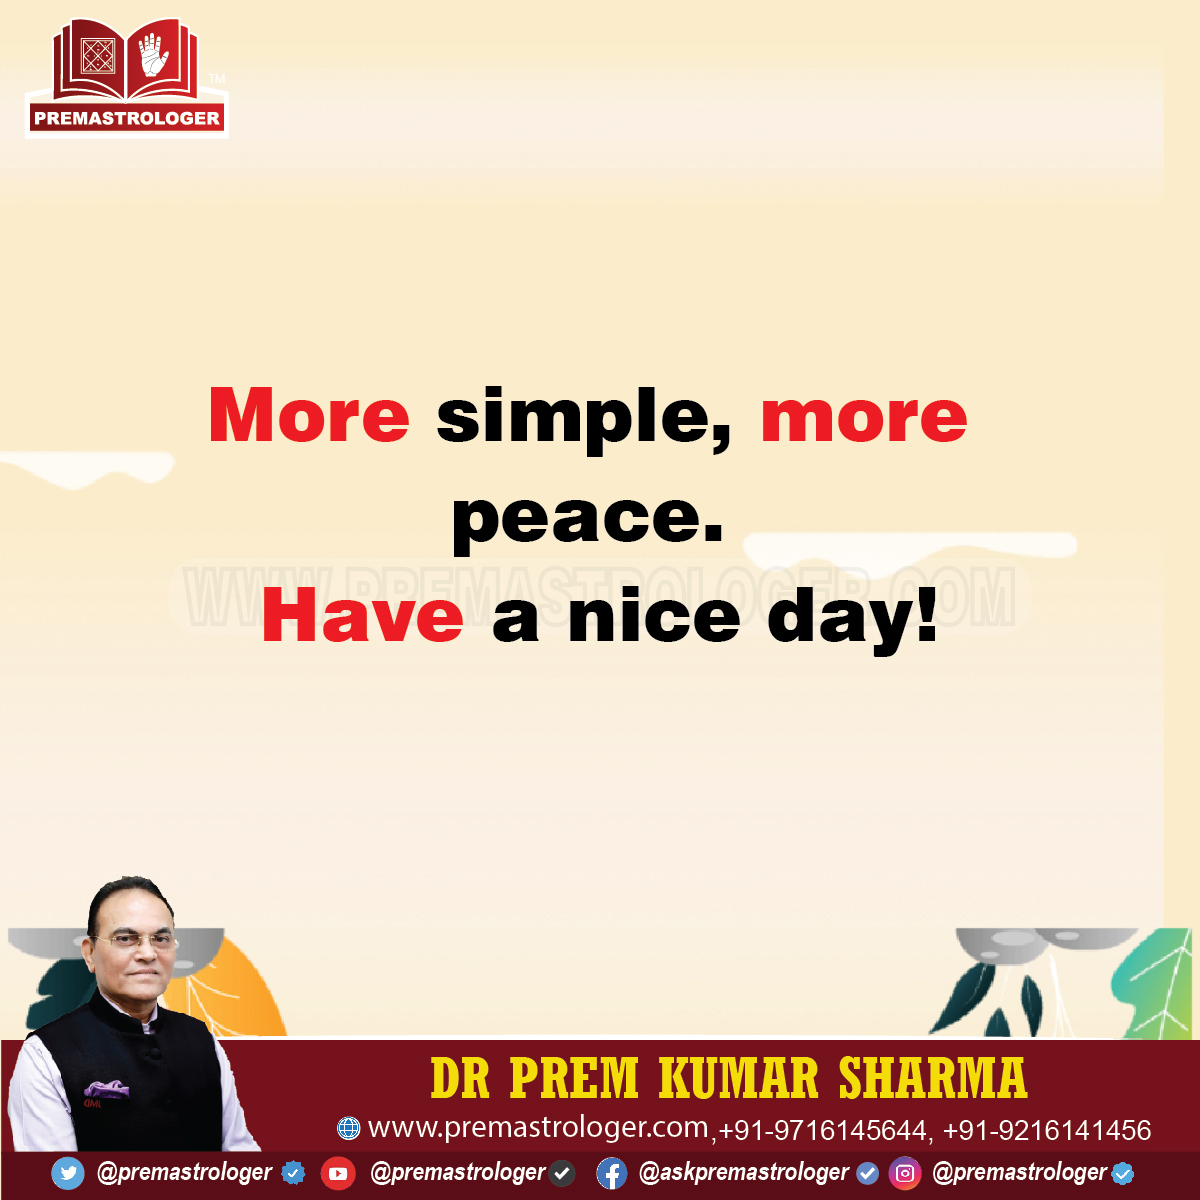 More simple, more peace. Have a nice day!

#GoodmorningTwitter
#सुप्रभात
#Mondaymorninglive
#MondayVibes
#Mondaymotivations
#Mondaymorning
#MondayThoughts